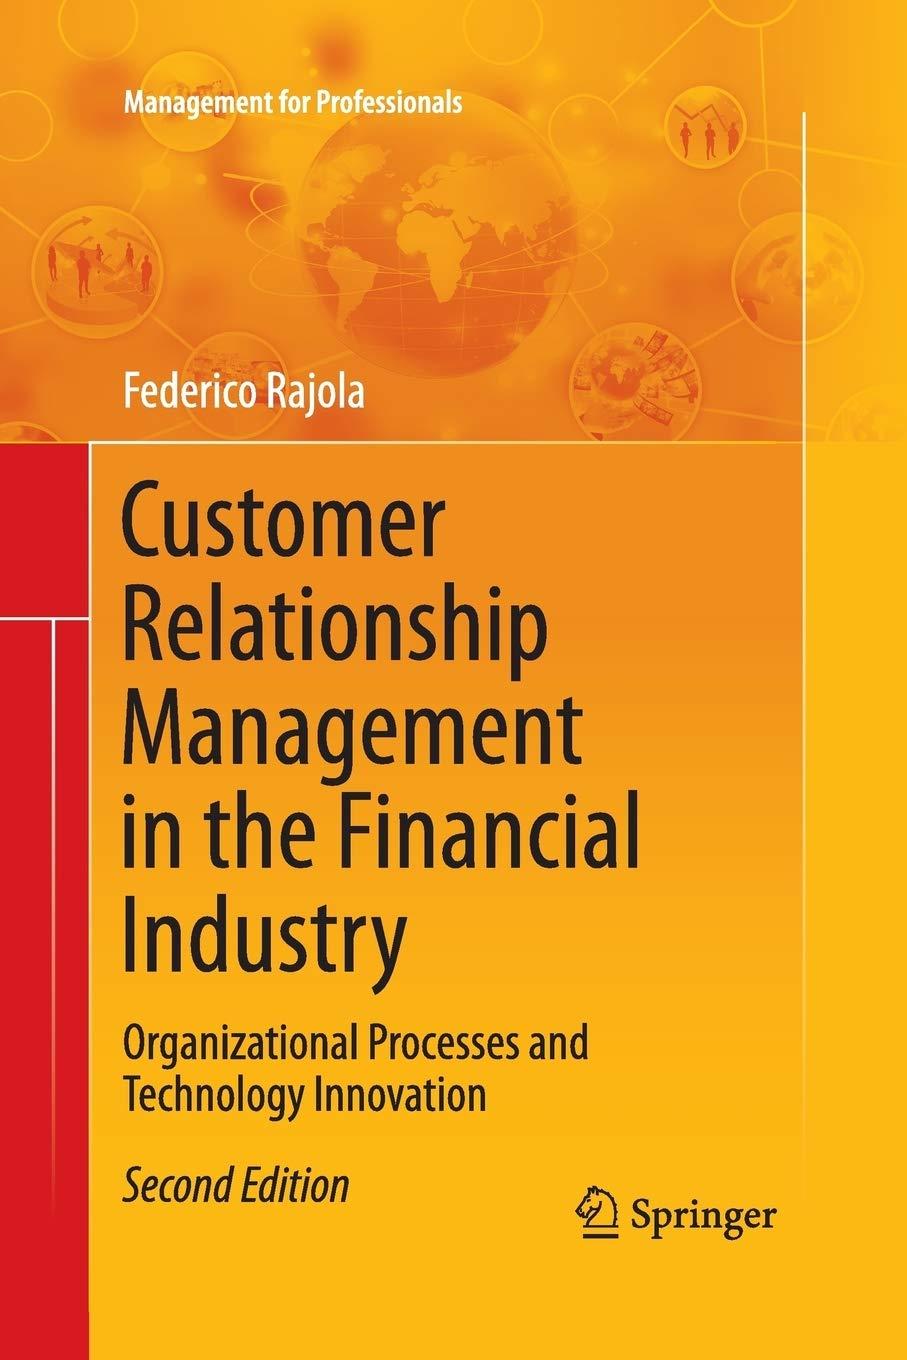 customer relationship management in the financial industry 2nd edition federico rajola 3642435645,